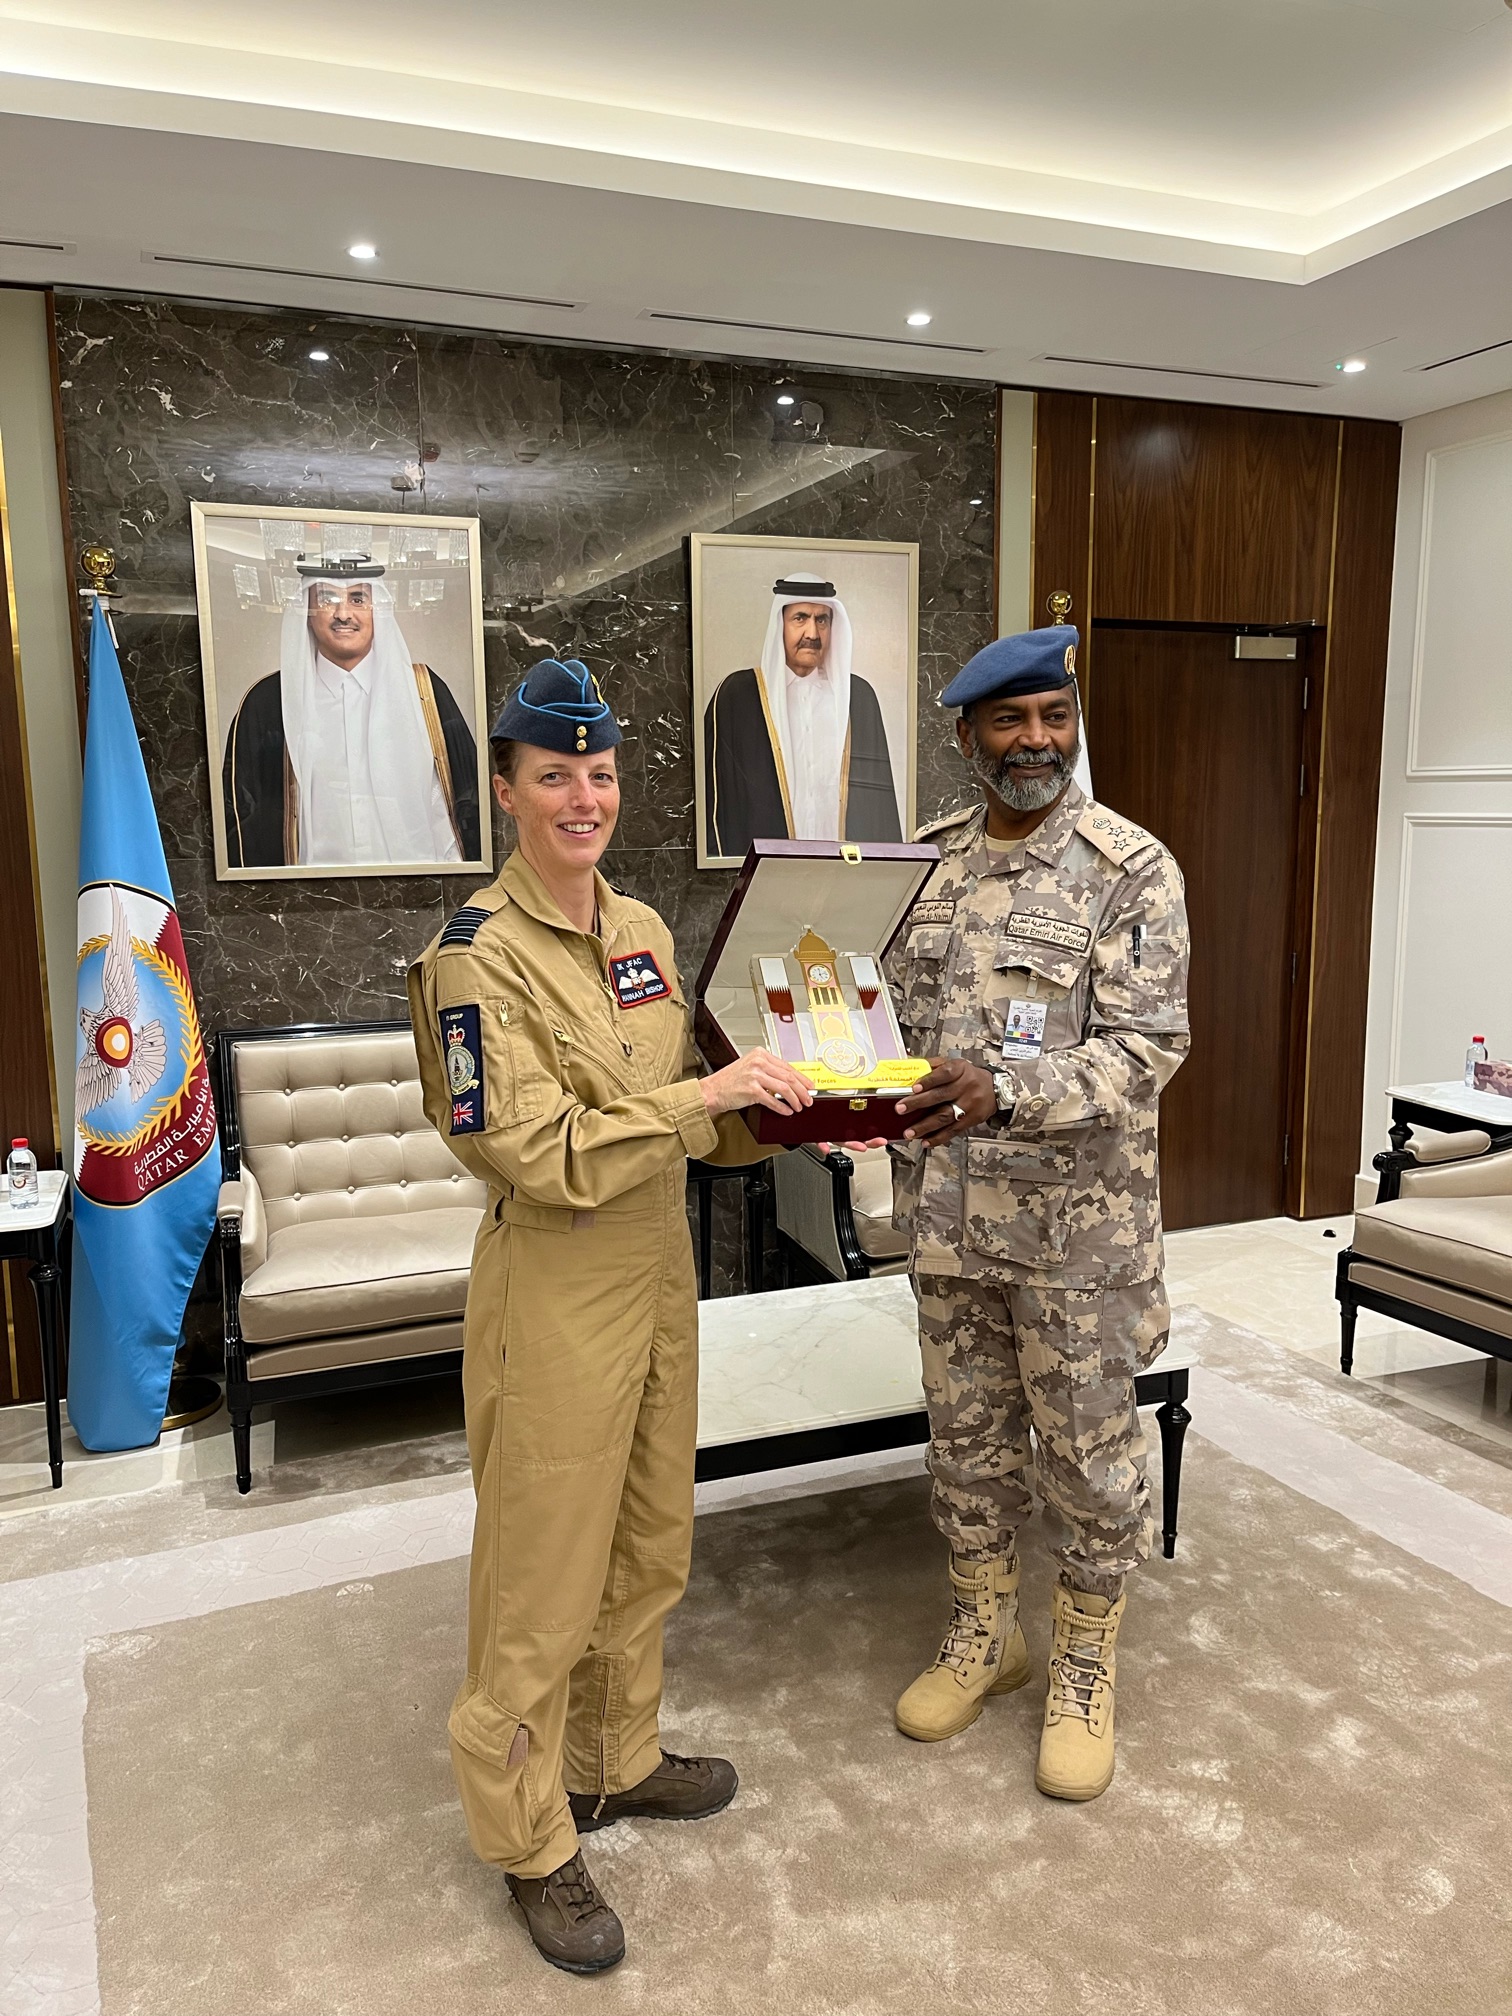 RAF officer accepts gift from Qatari emirates air force